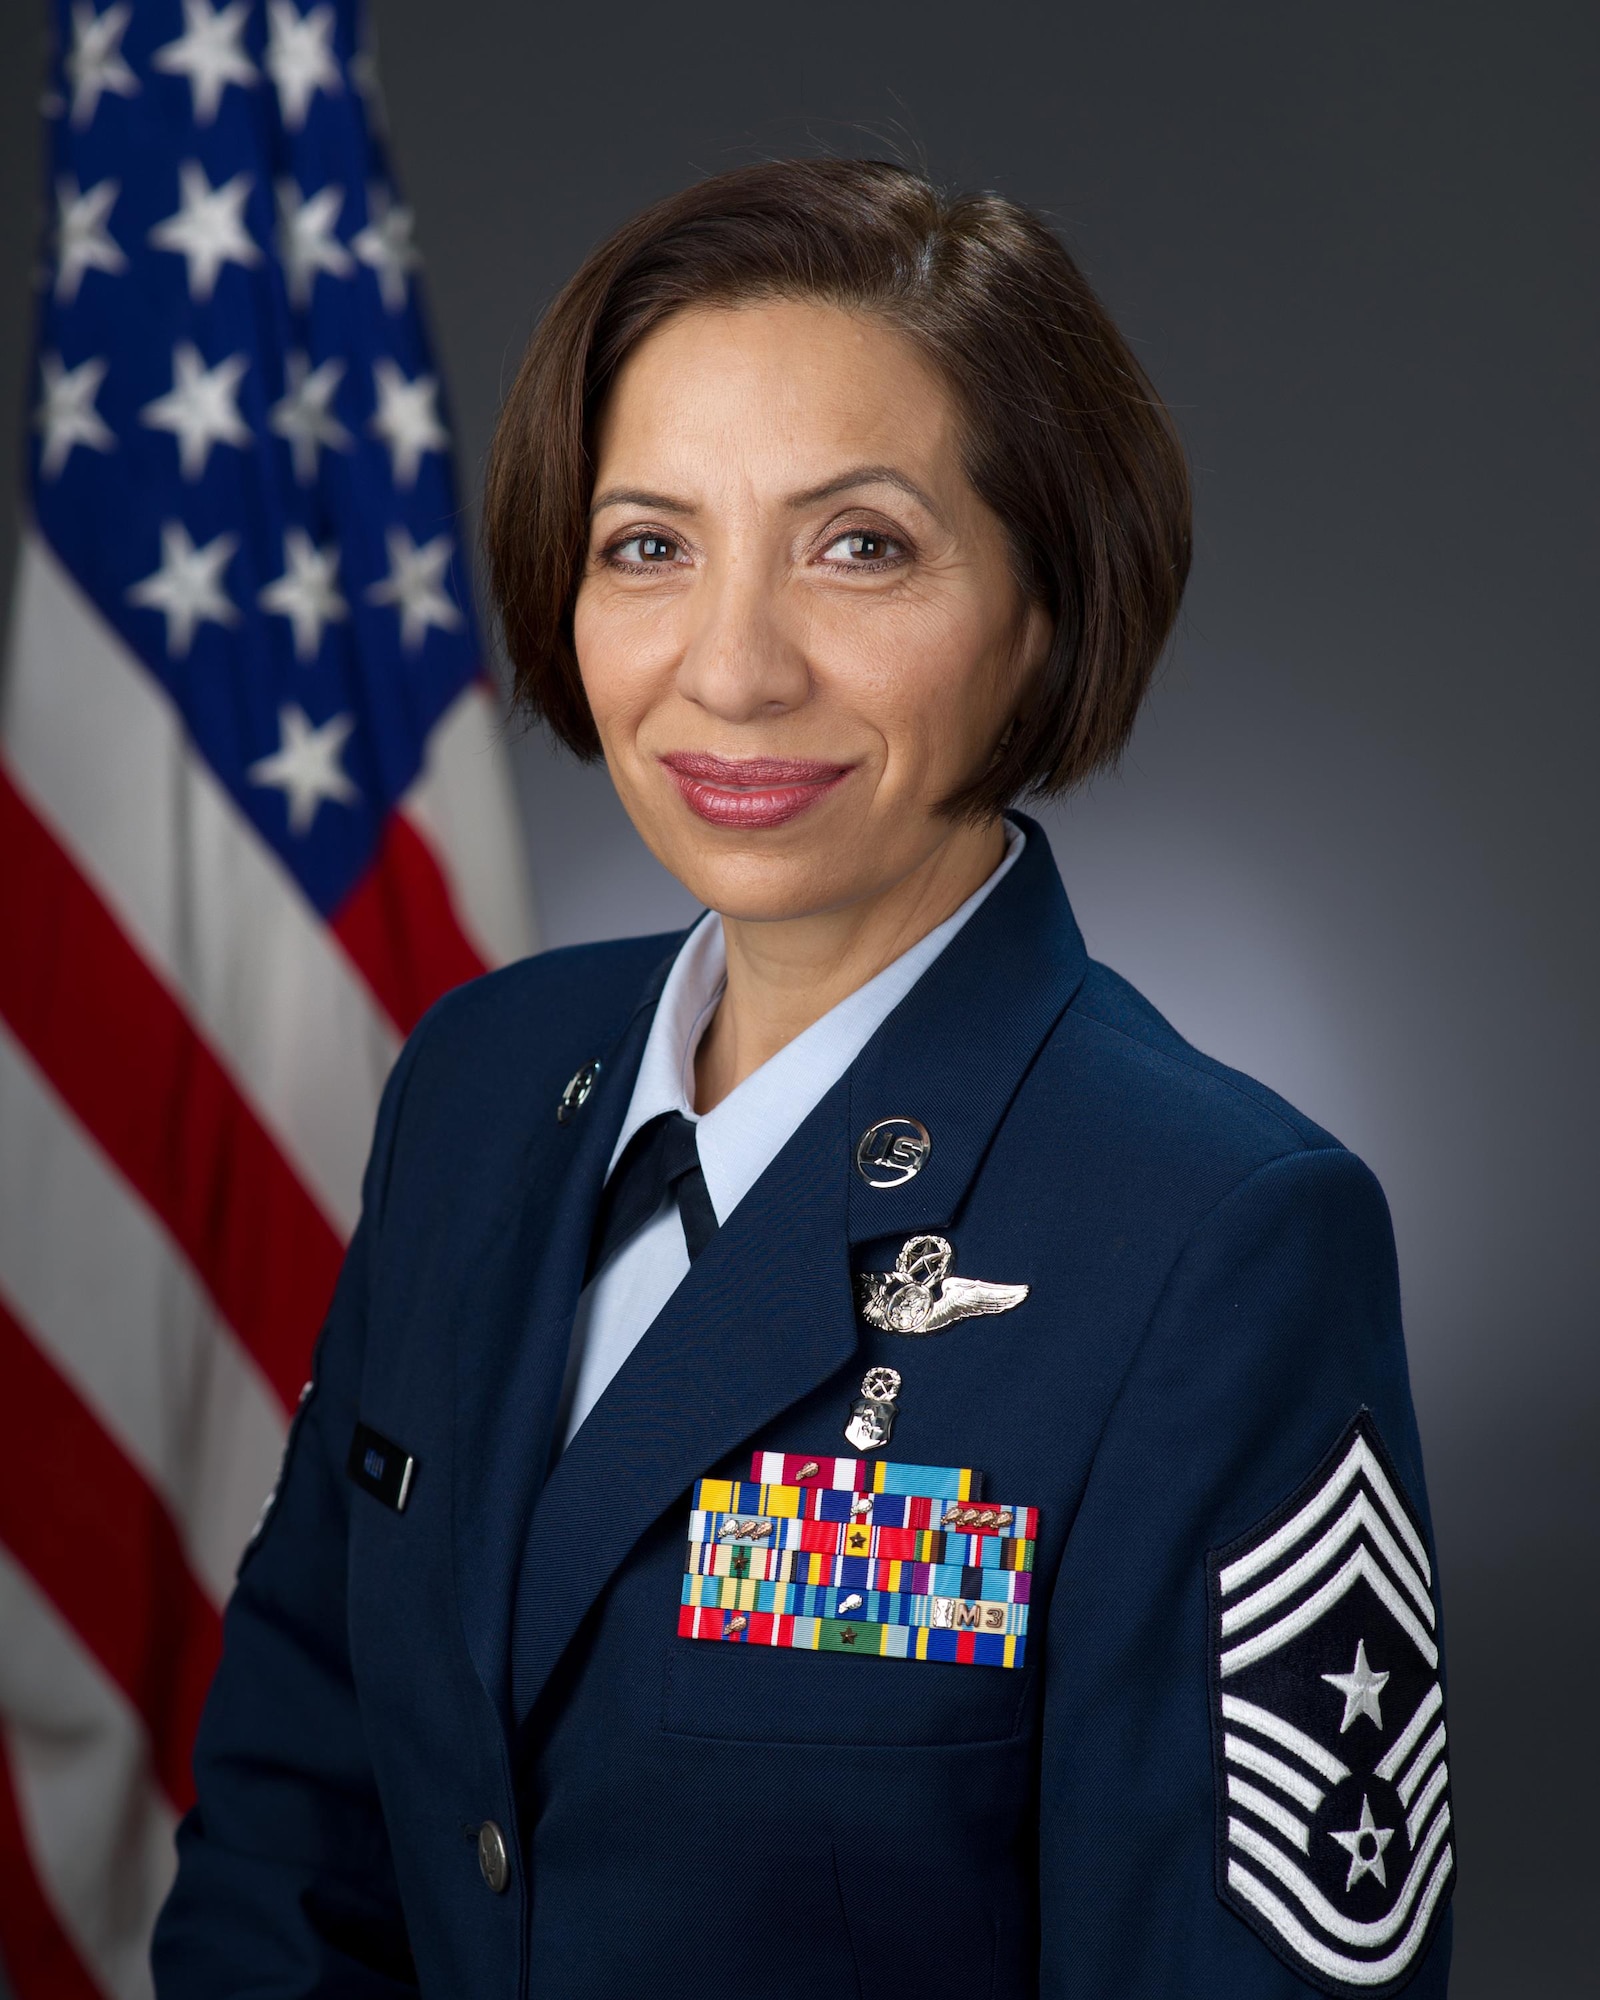 Chief Master Sgt. Ericka Kelly, command chief master sergeant, Air Force Reserve Command